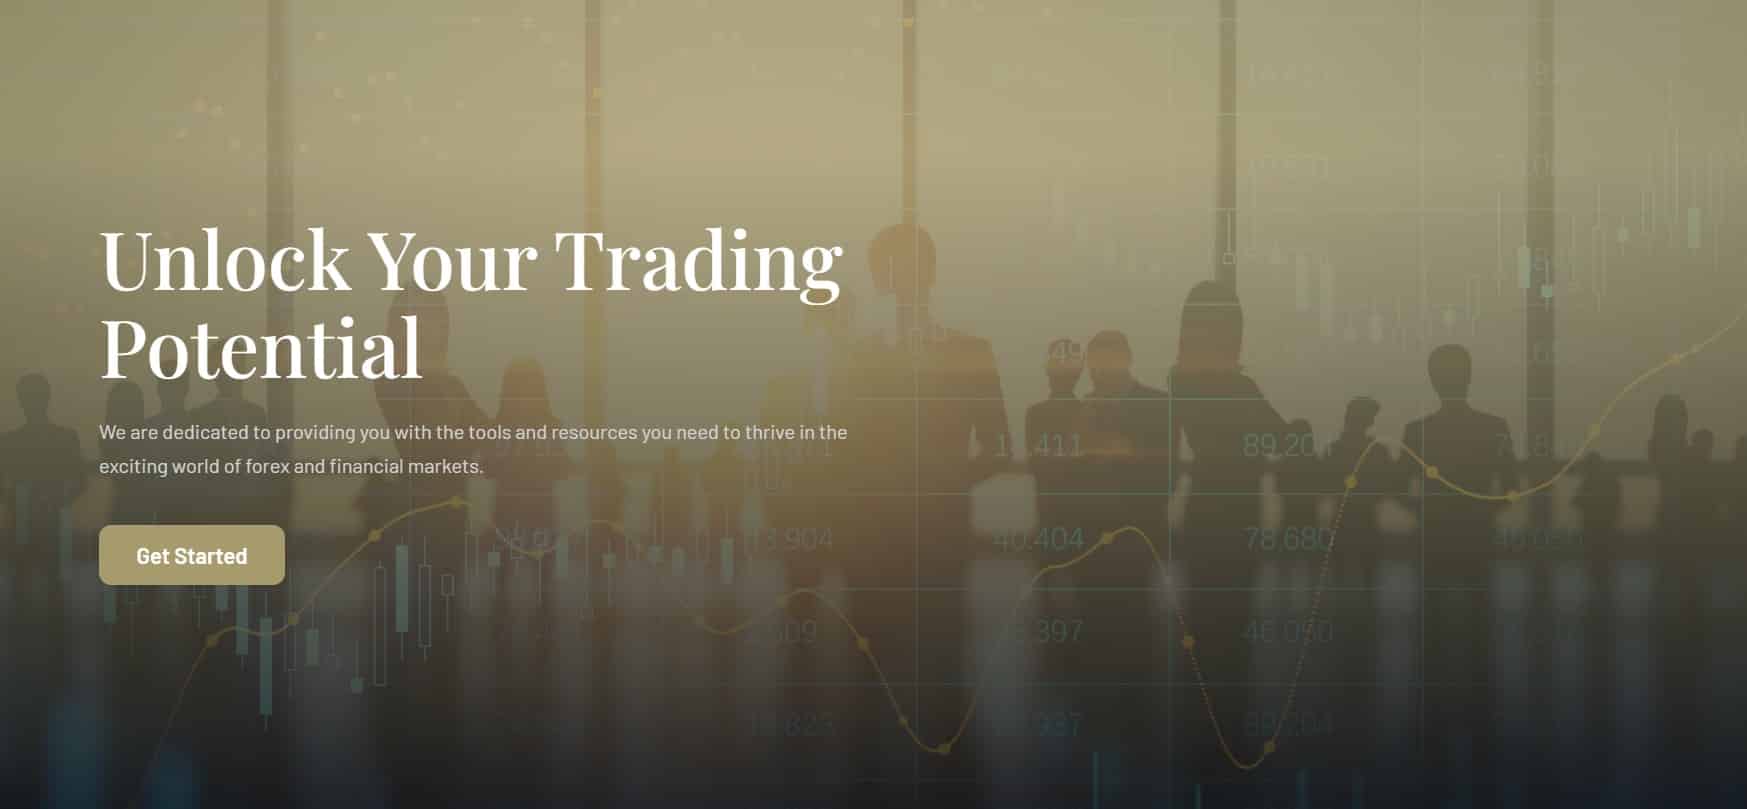 Londongroup Investments Trading